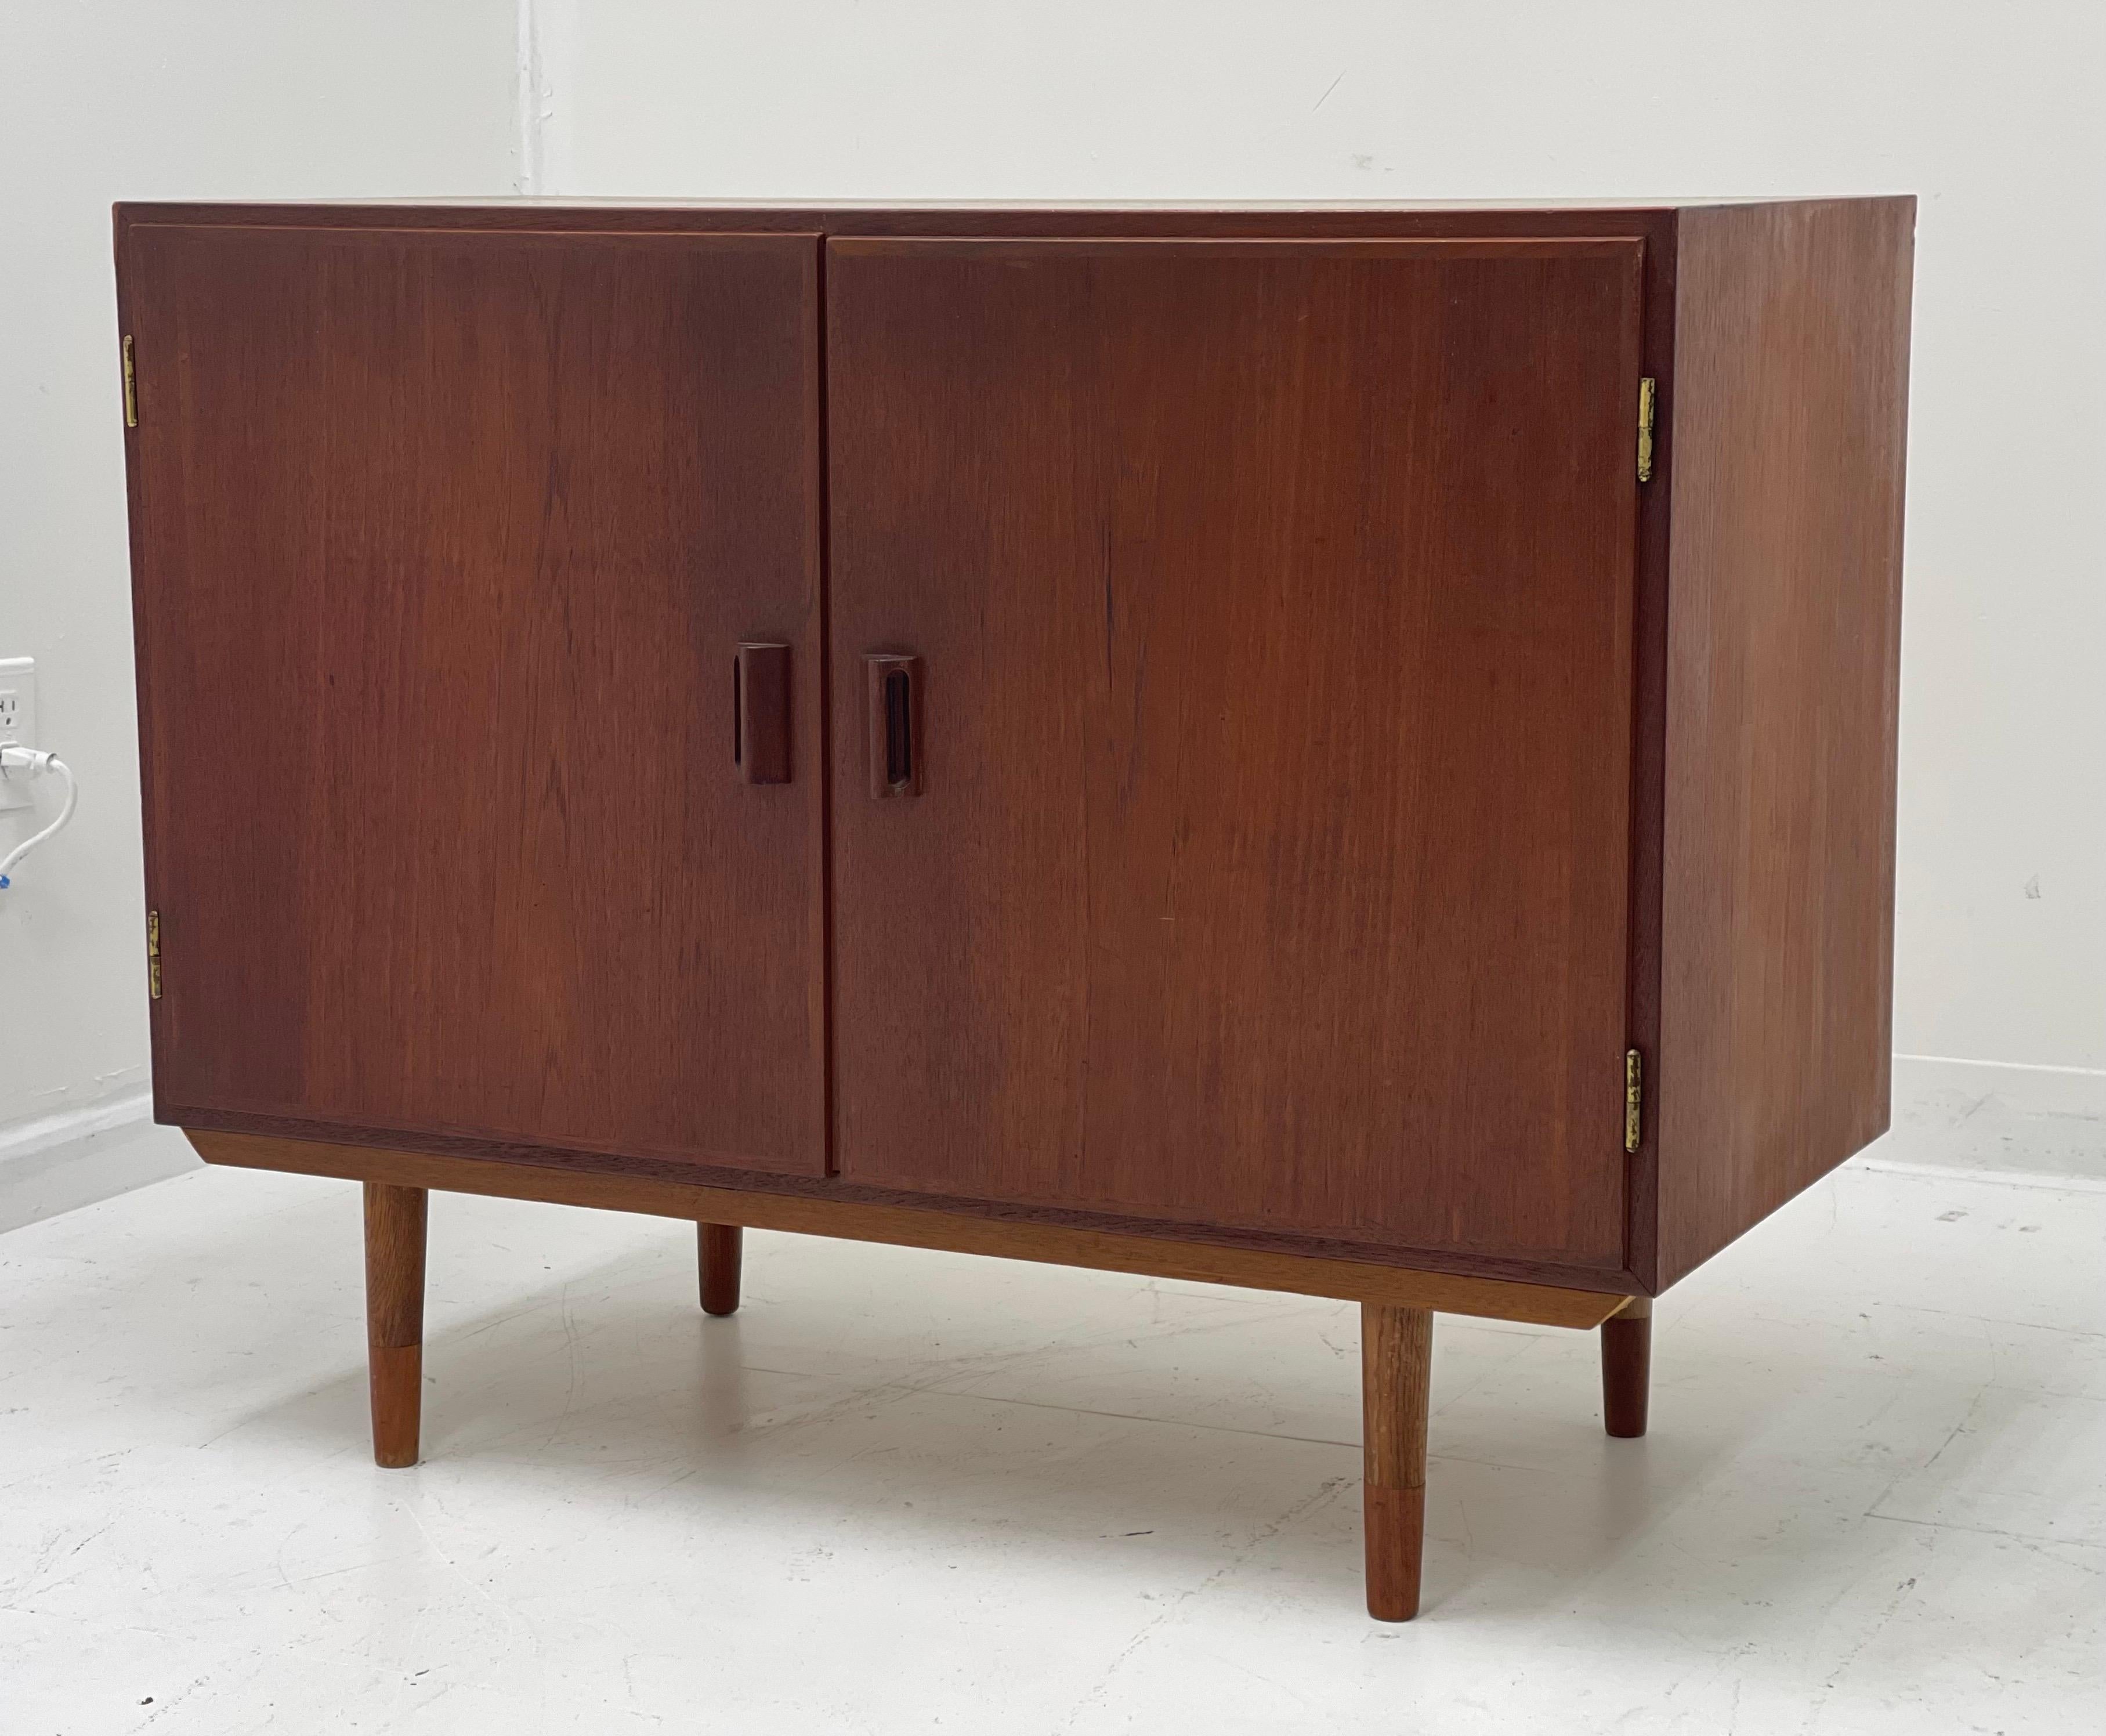 Vintage Danish teak and oak cabinet designed in 1952 by Danish great, Børge Mogensen. Two pull out doors with brass hinges featuring trademark Mogensen solid teak handle pulls, reveals adjustable height shelf with plenty of storage beneath. Labeled